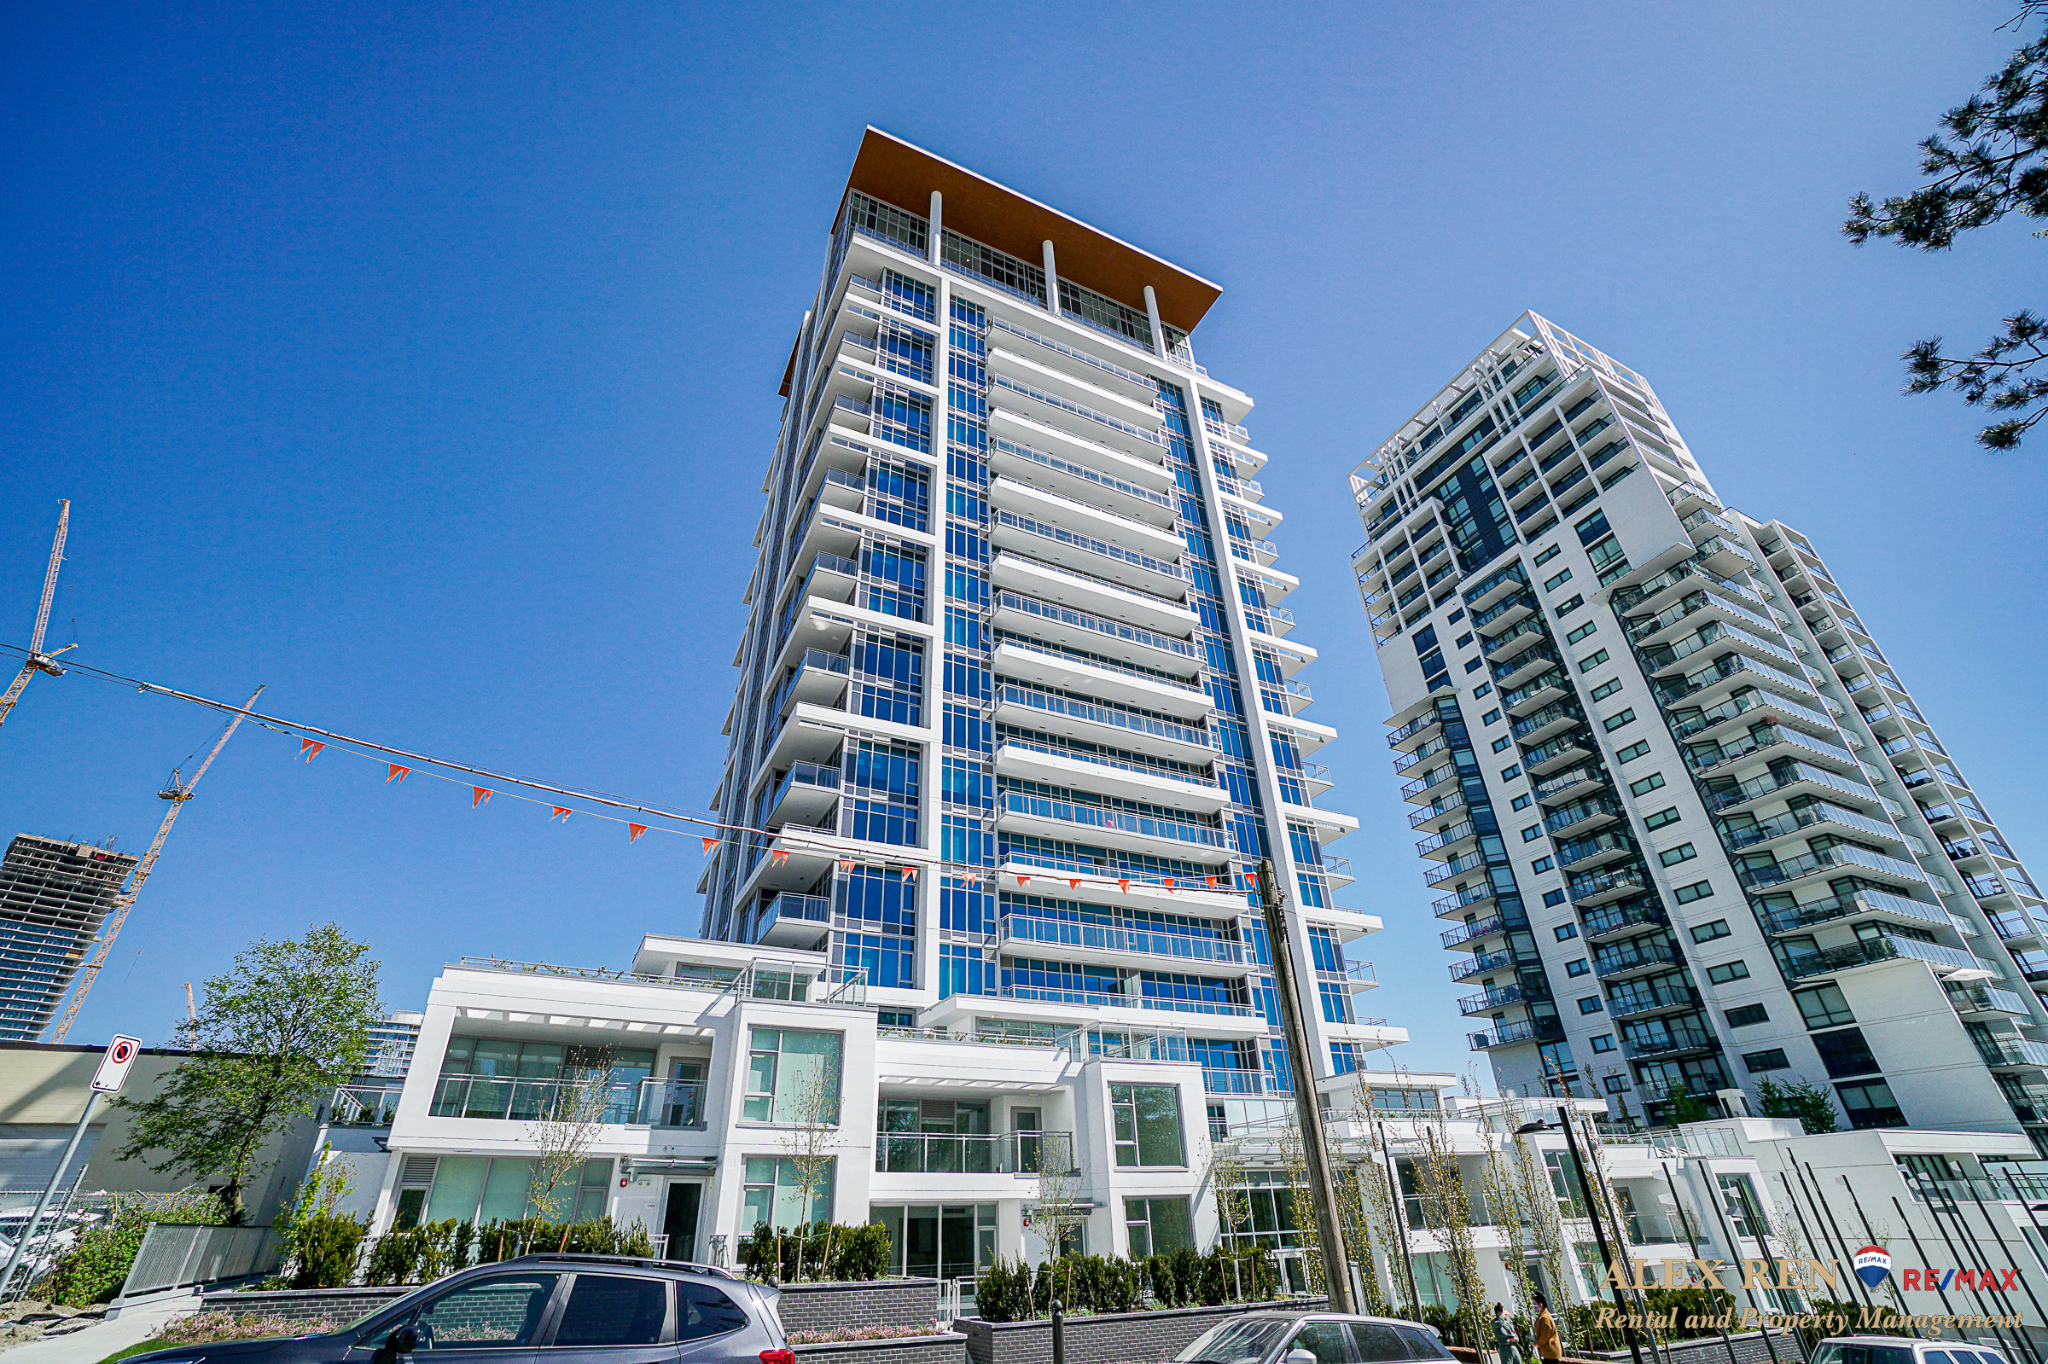 Main Photo: Modern Lifestyle 2BR Condo in Prime Brentwood Area Burnaby (AR202)